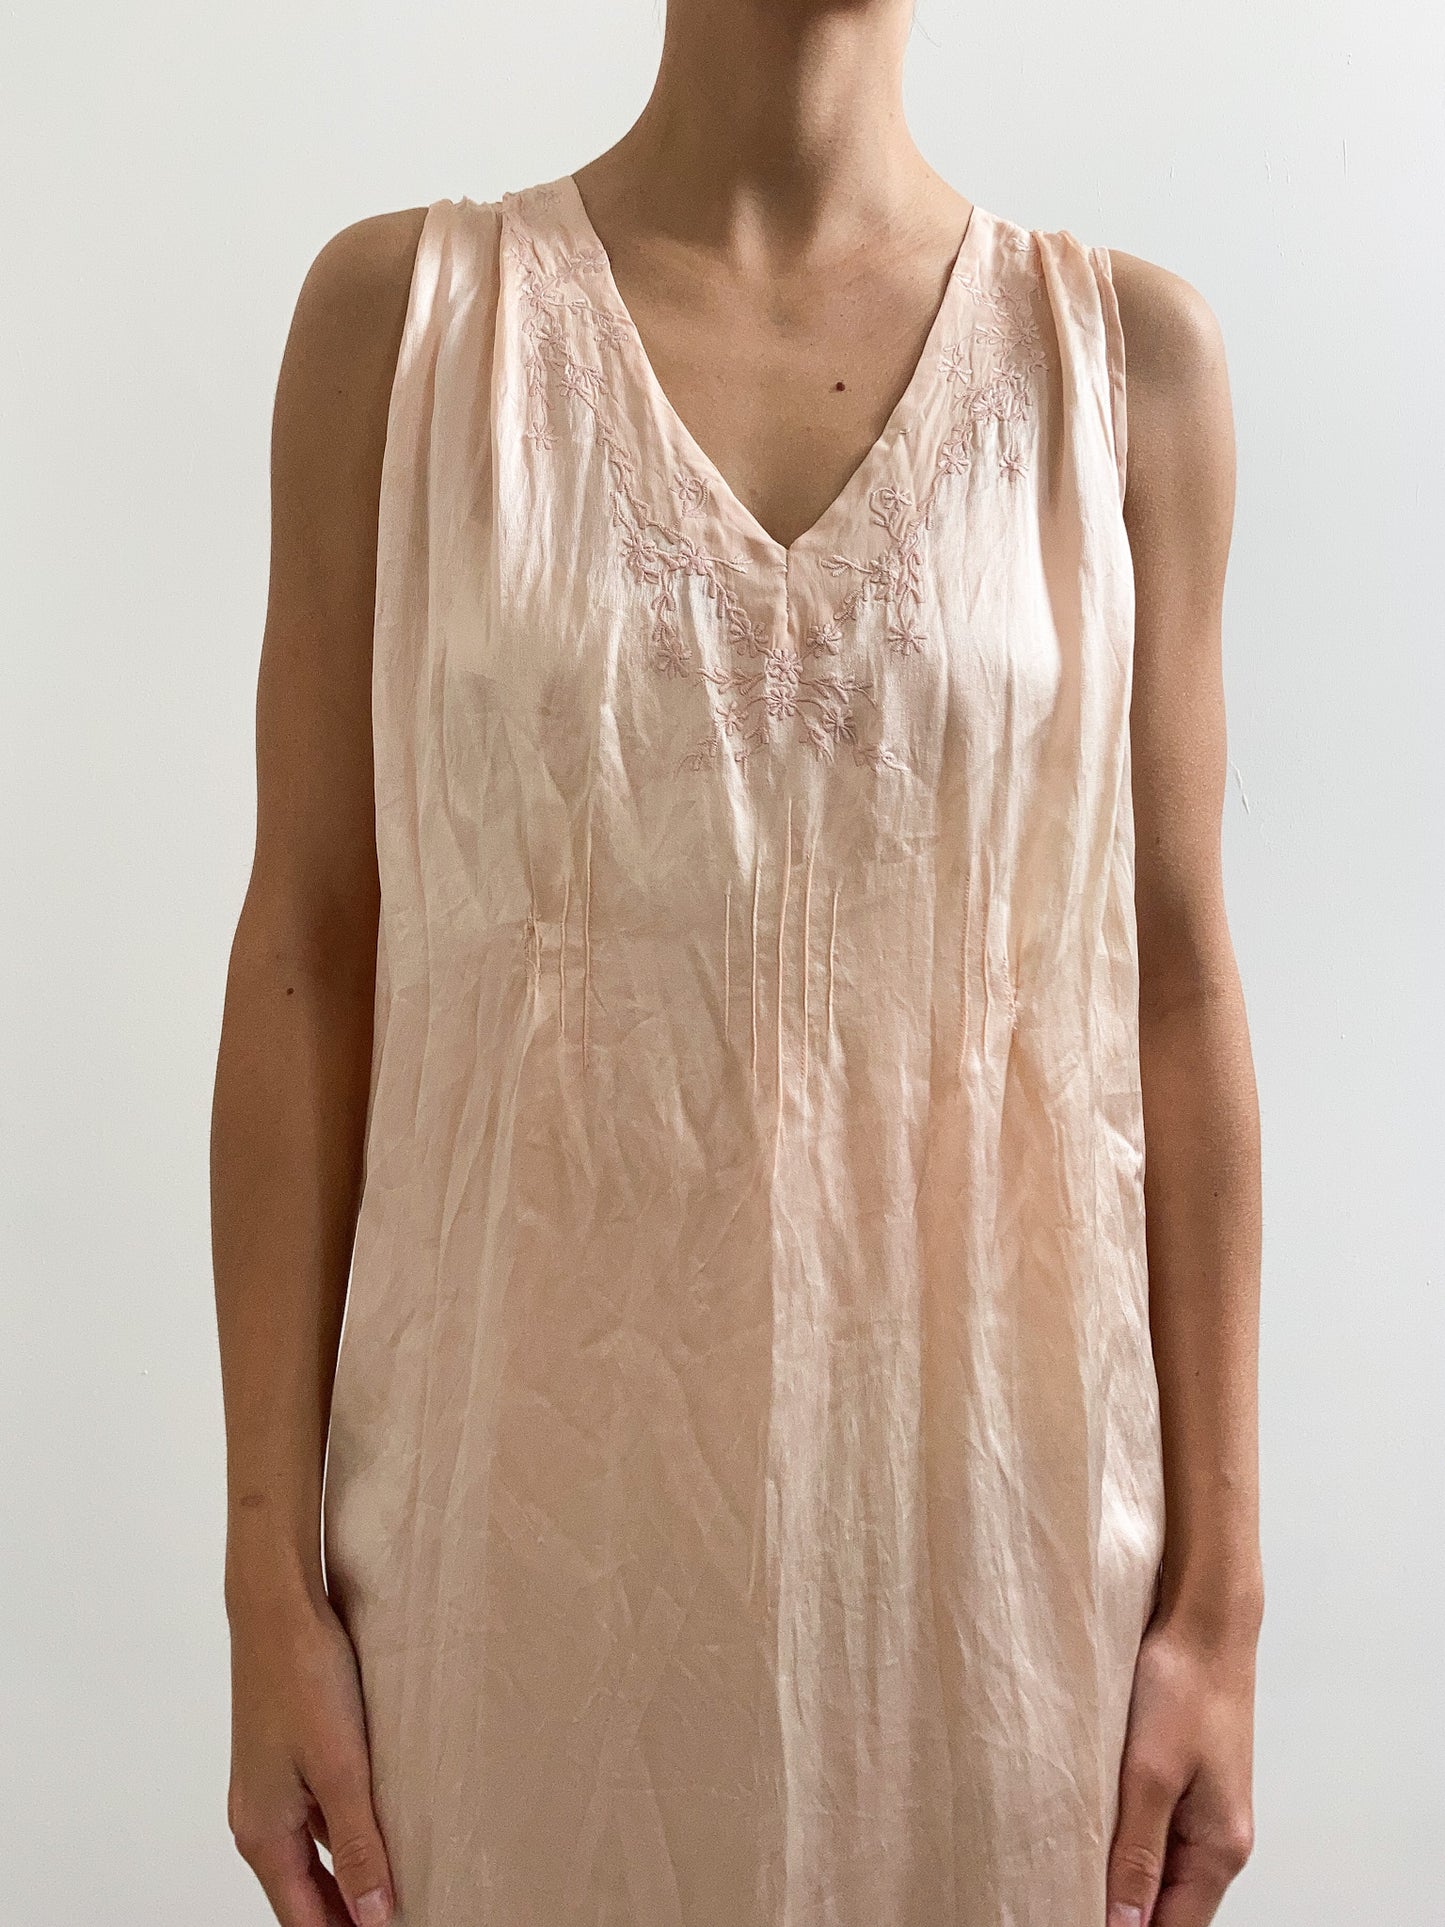 1930s Peach Satin Slip with Floral Embroidery